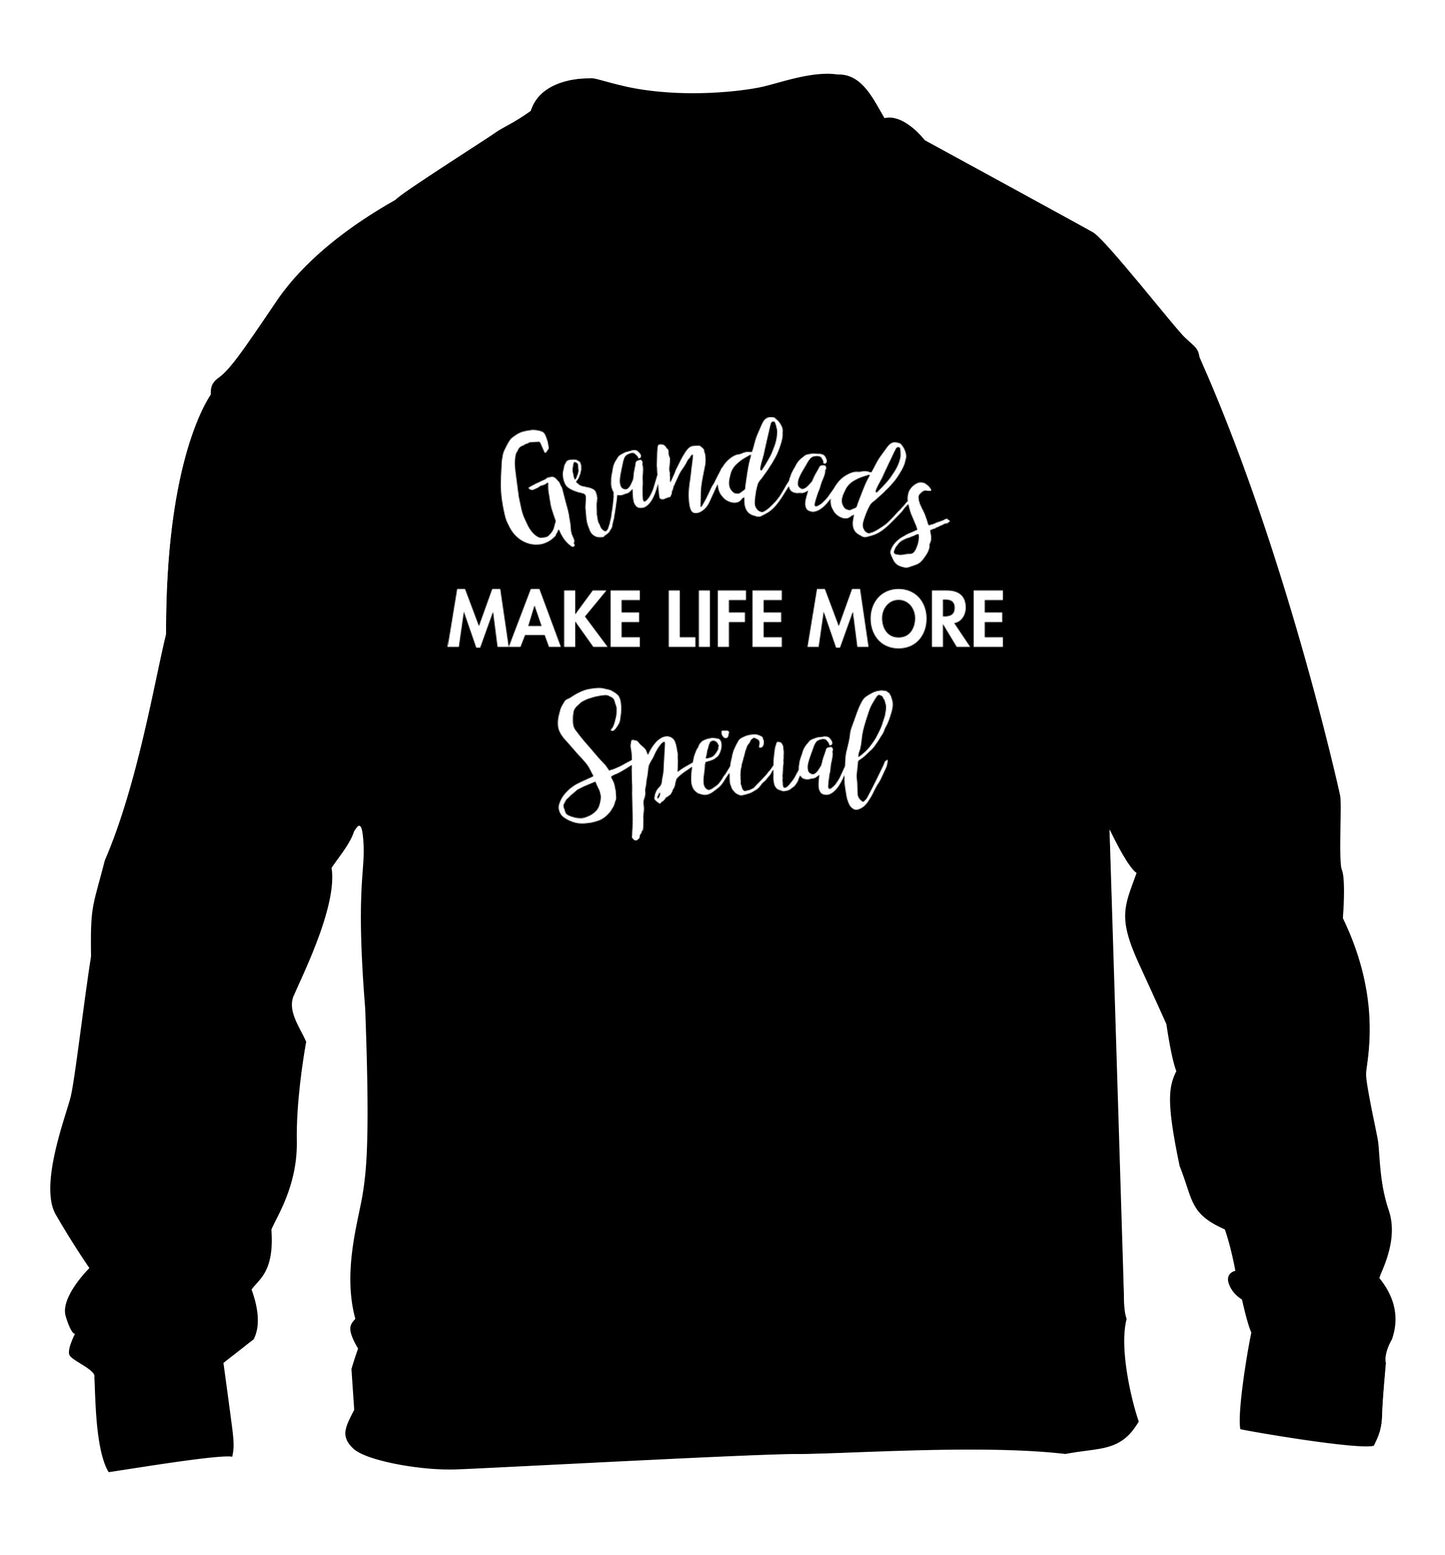 Grandads make life more special children's black sweater 12-14 Years